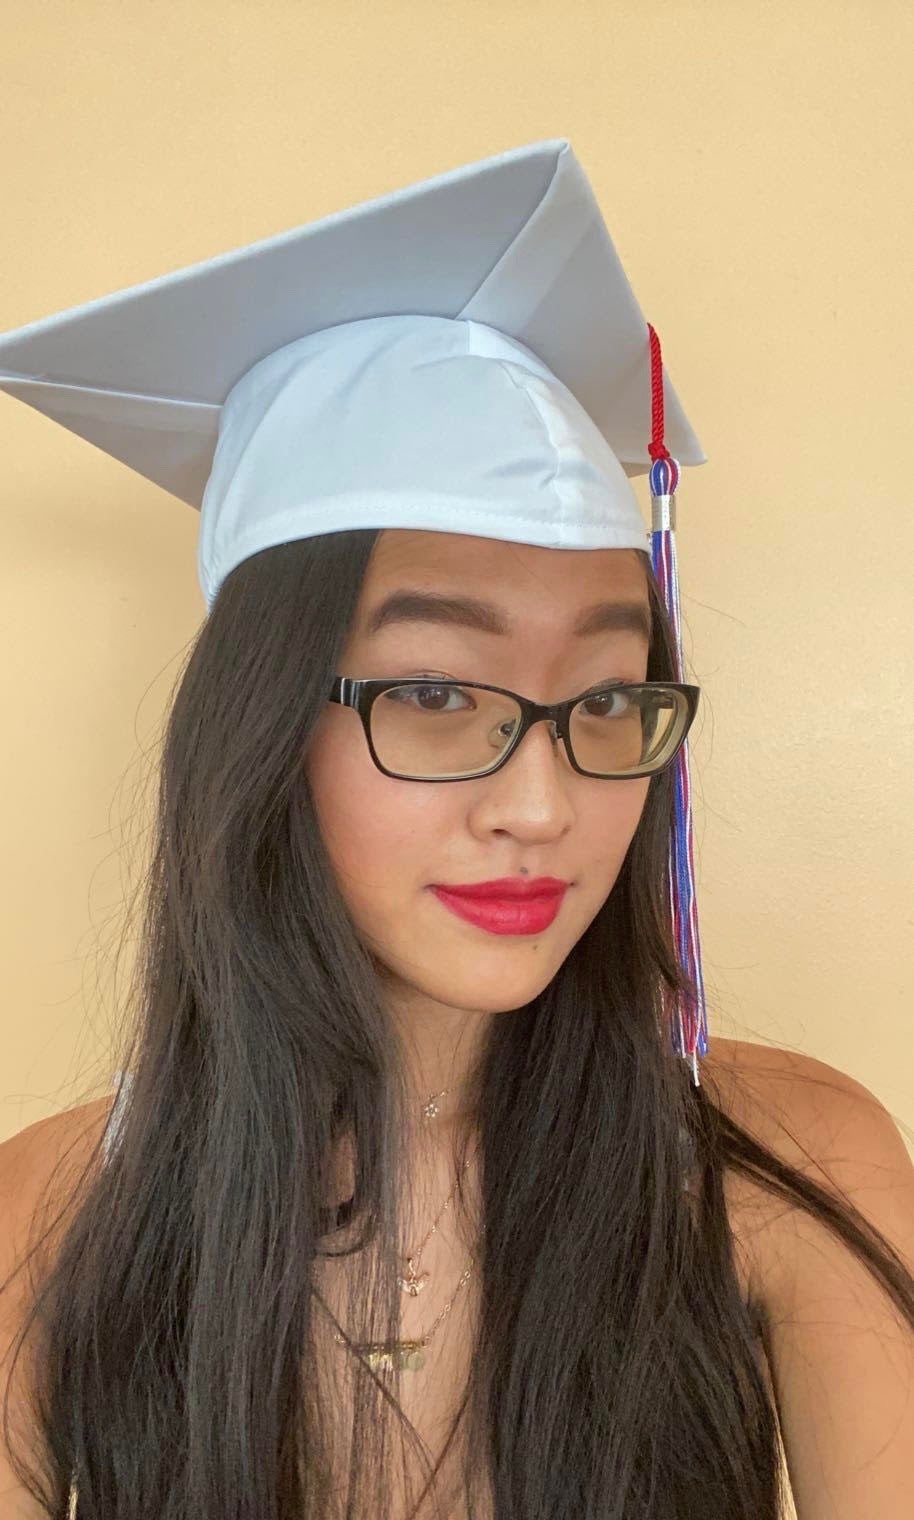 A young Chinese American woman with long brown hair and glasses wears a white graduation cap.